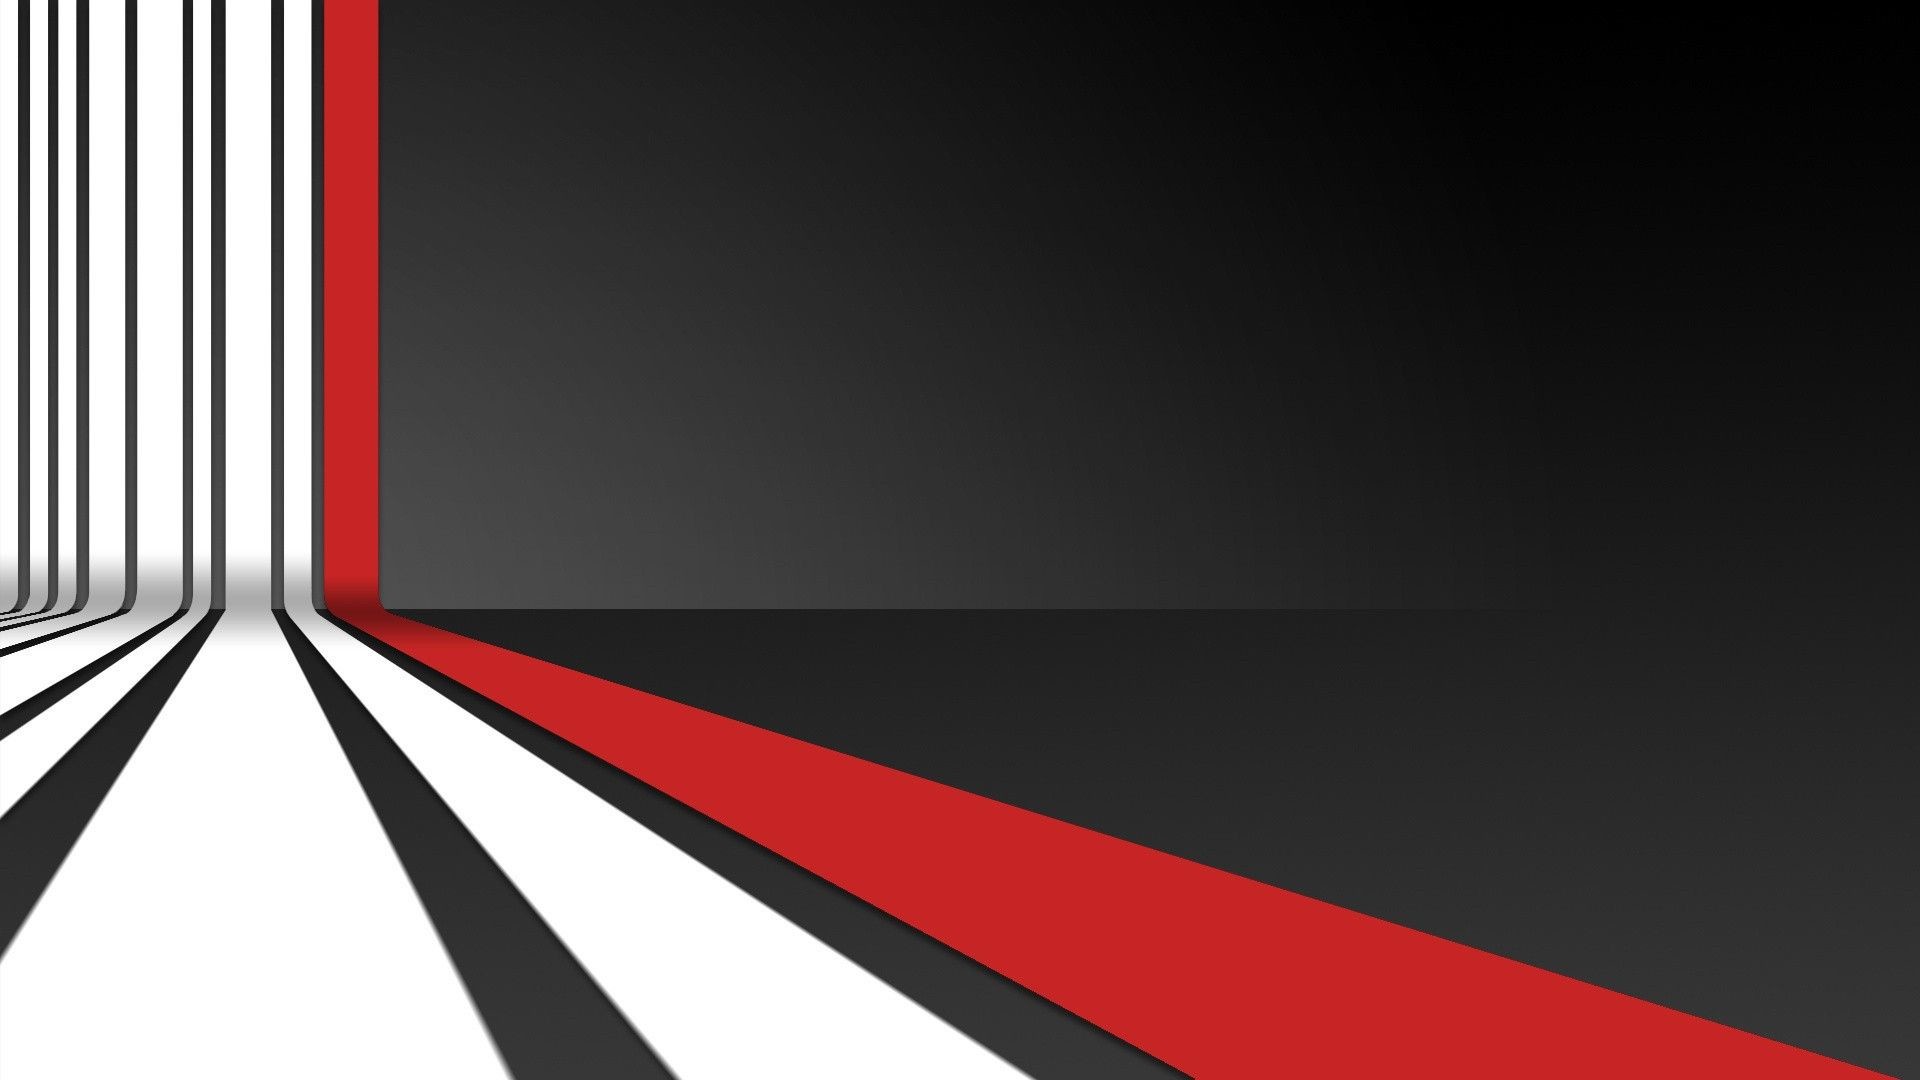 1920x1080 White Striped and Red Stripe White Striped and Red Stripe HD Wallpaper